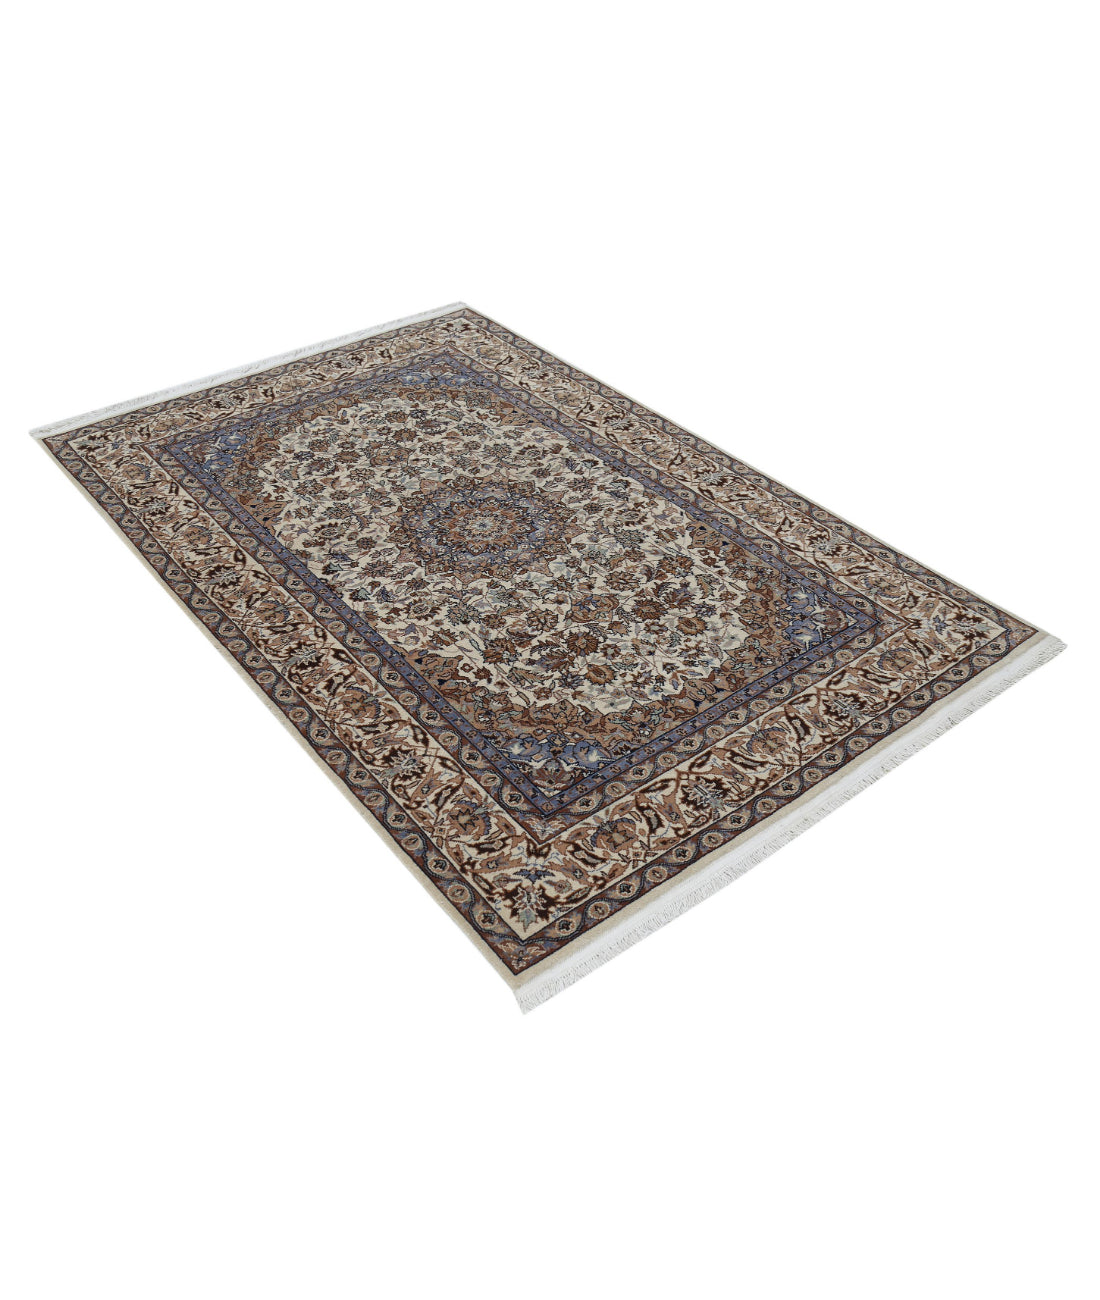 Heritage 4'0'' X 5'11'' Hand-Knotted Wool Rug 4'0'' x 5'11'' (120 X 178) / Ivory / Taupe